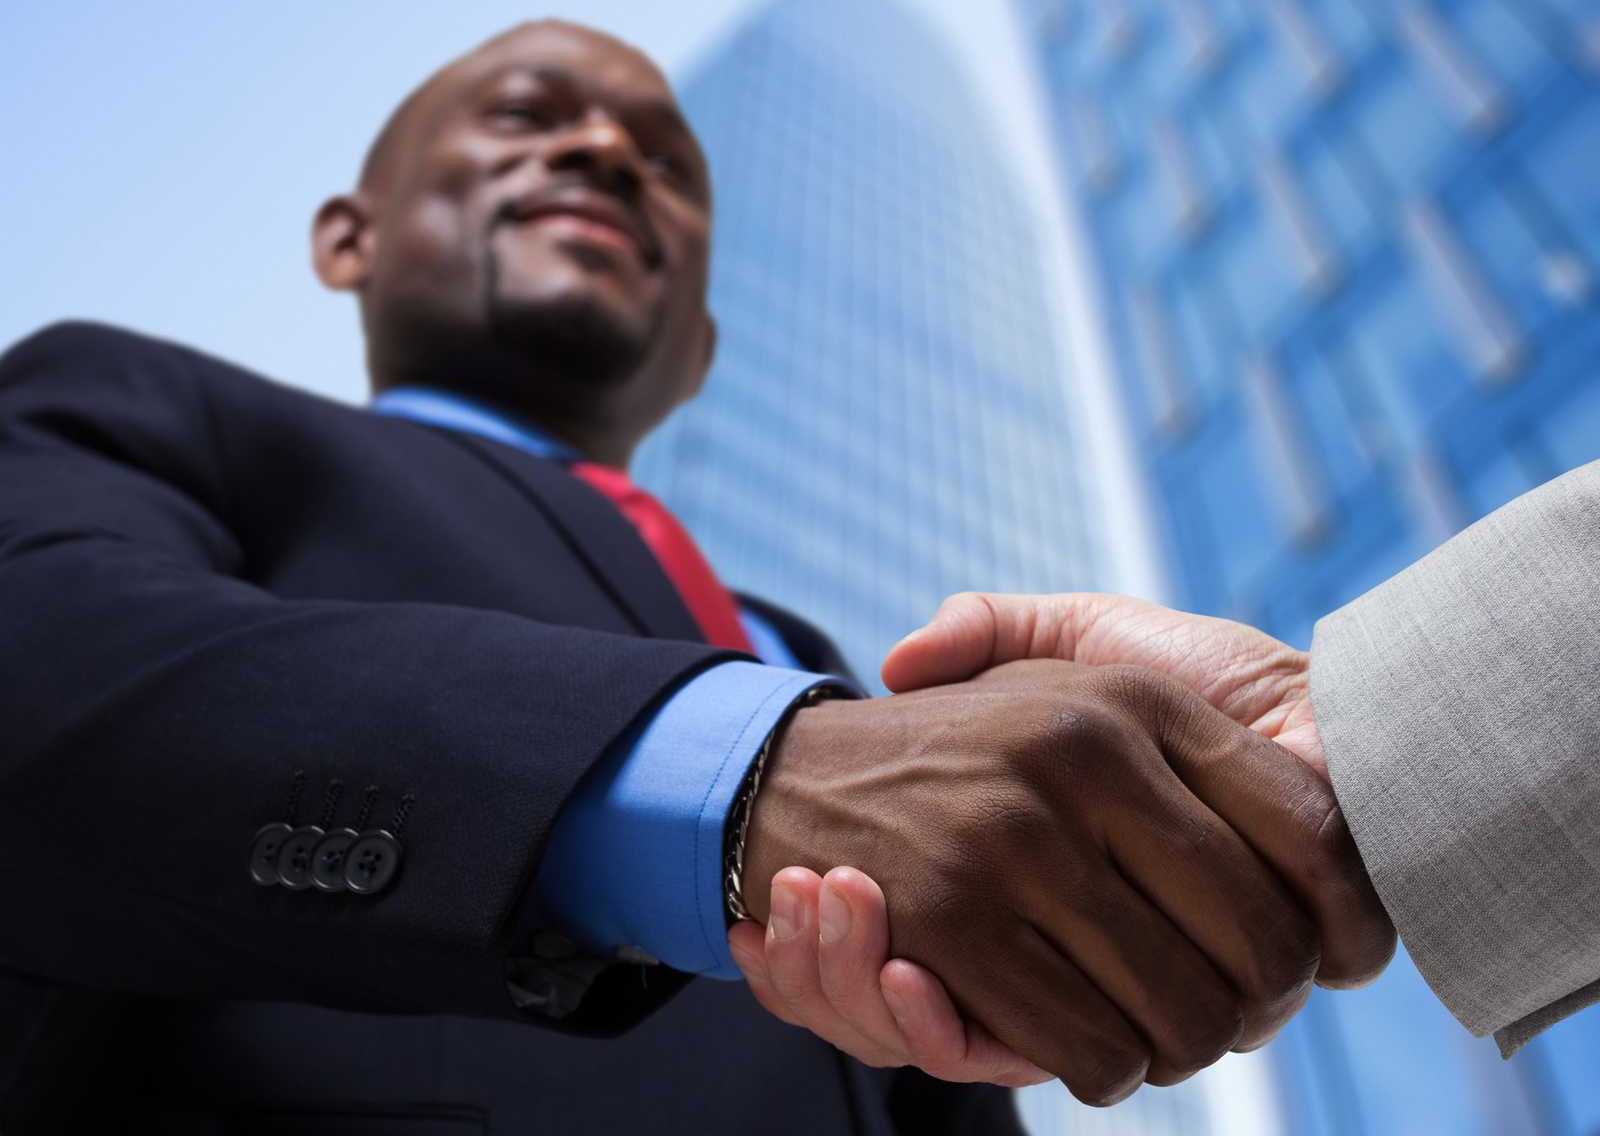 Portrait-of-a-businessmen-shaking-hands-in-a-business-environment